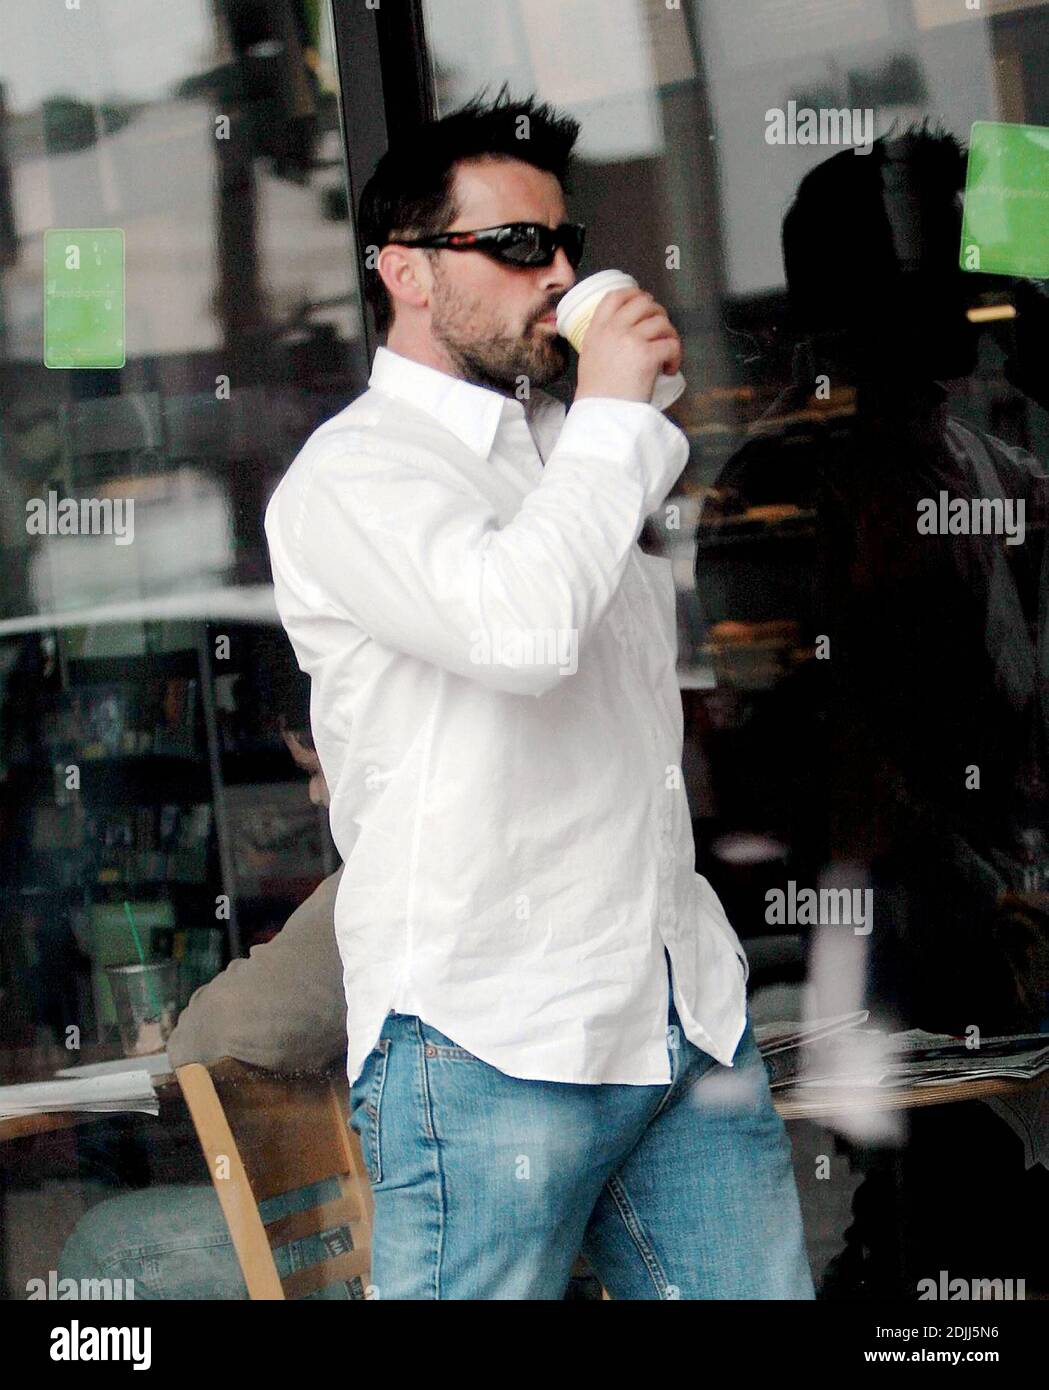 Matt LeBlanc tries to go incognito with heavy facial hair and sunglasses  but female fans still spotted him at Starbucks in Los Angeles, Ca. The Joey  star, who has gained weight since